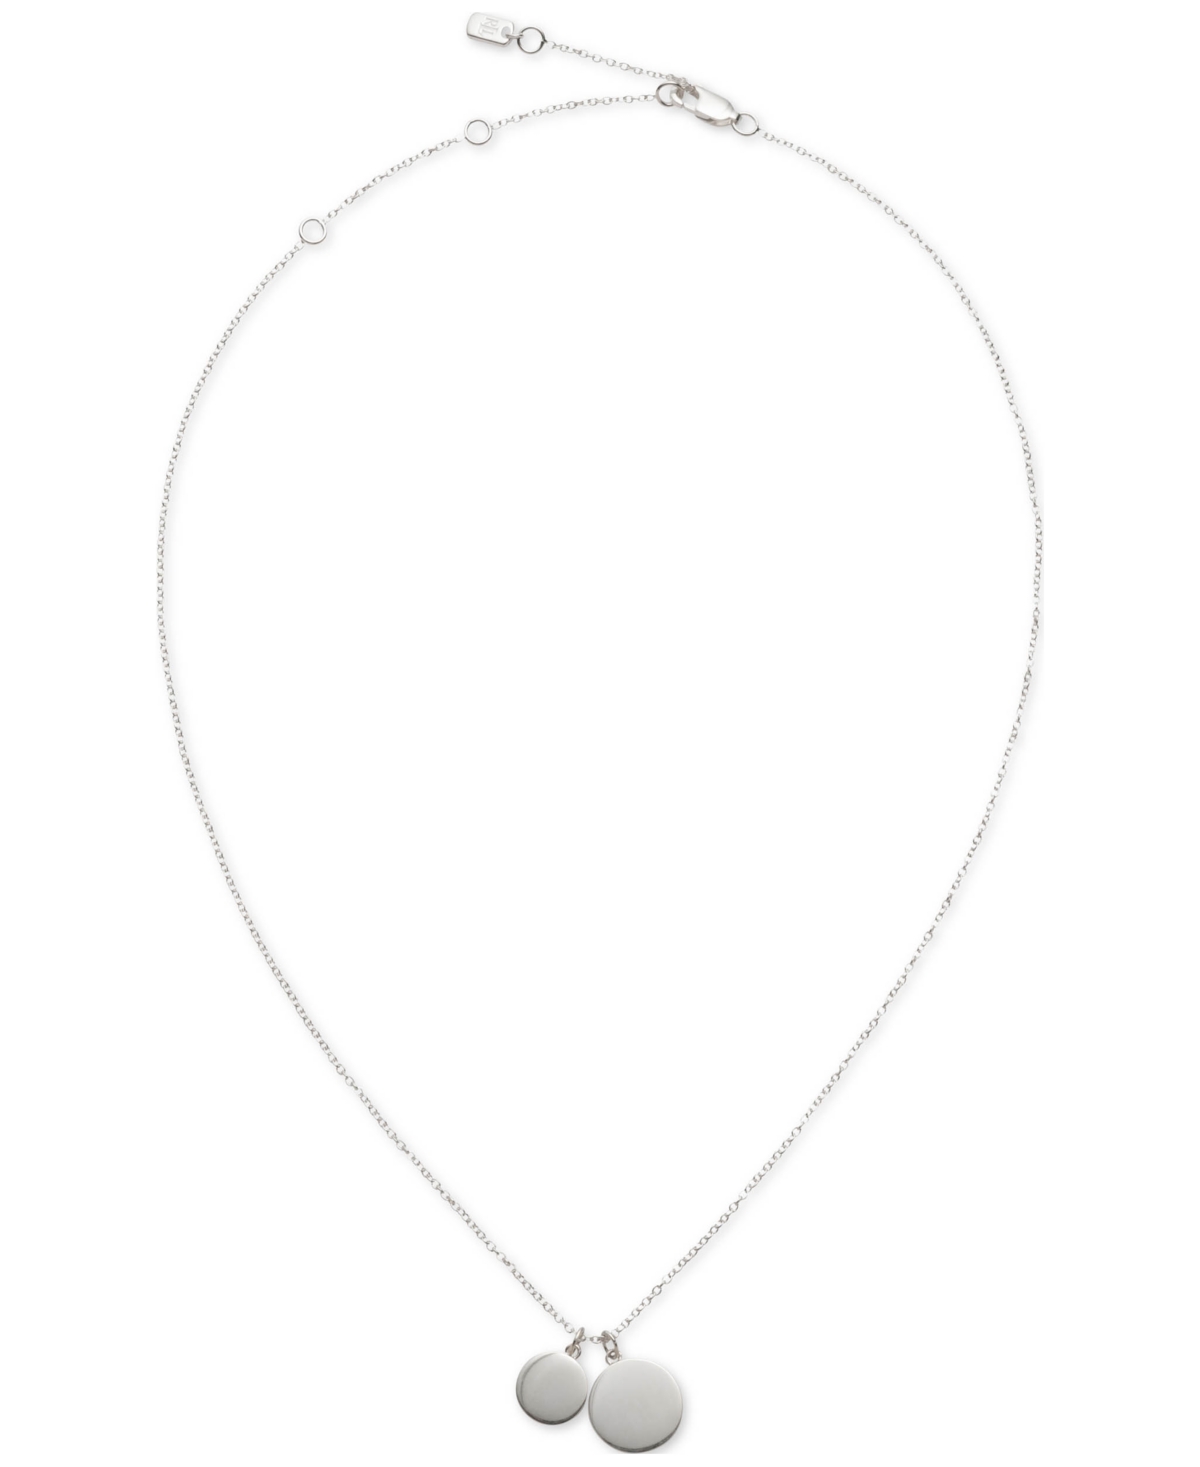 Lauren Ralph Lauren Polished Disc Charms Pendant Necklace in Sterling Silver, 15" + 3" extender - Silver